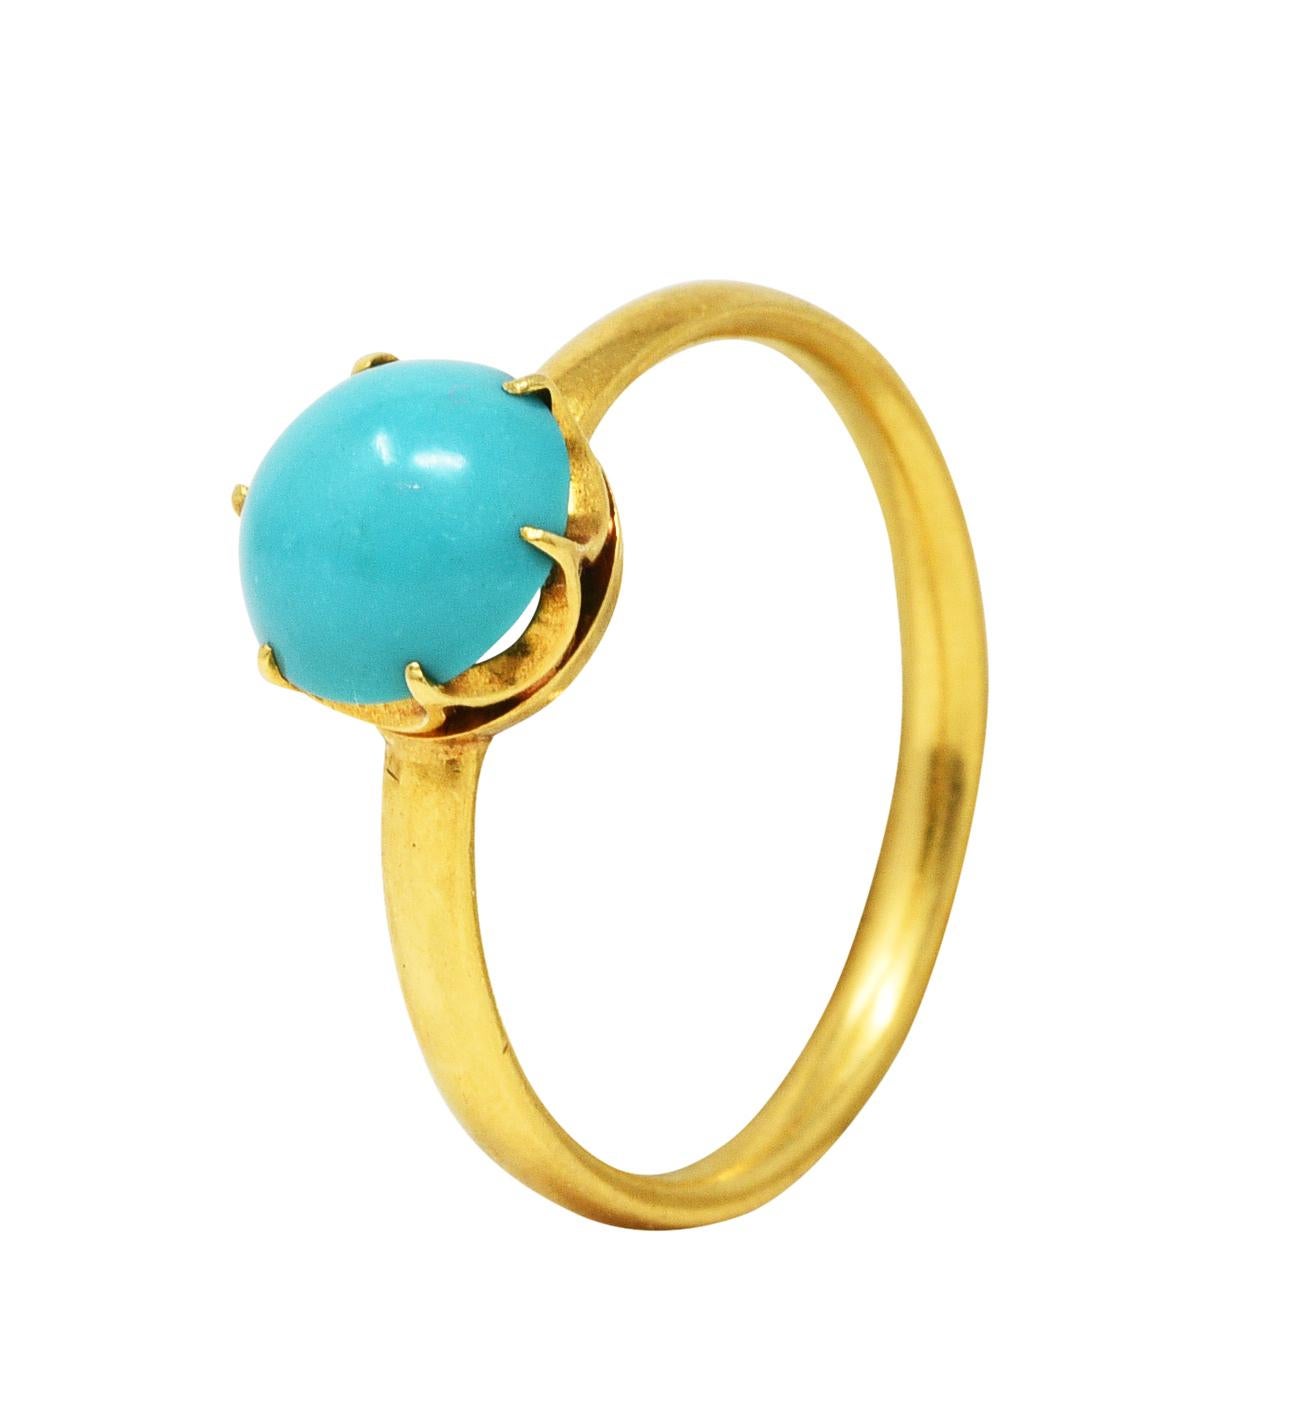 1960's Tiffany & Co. Turquoise 18 Karat Gold Solitaire Ring 3